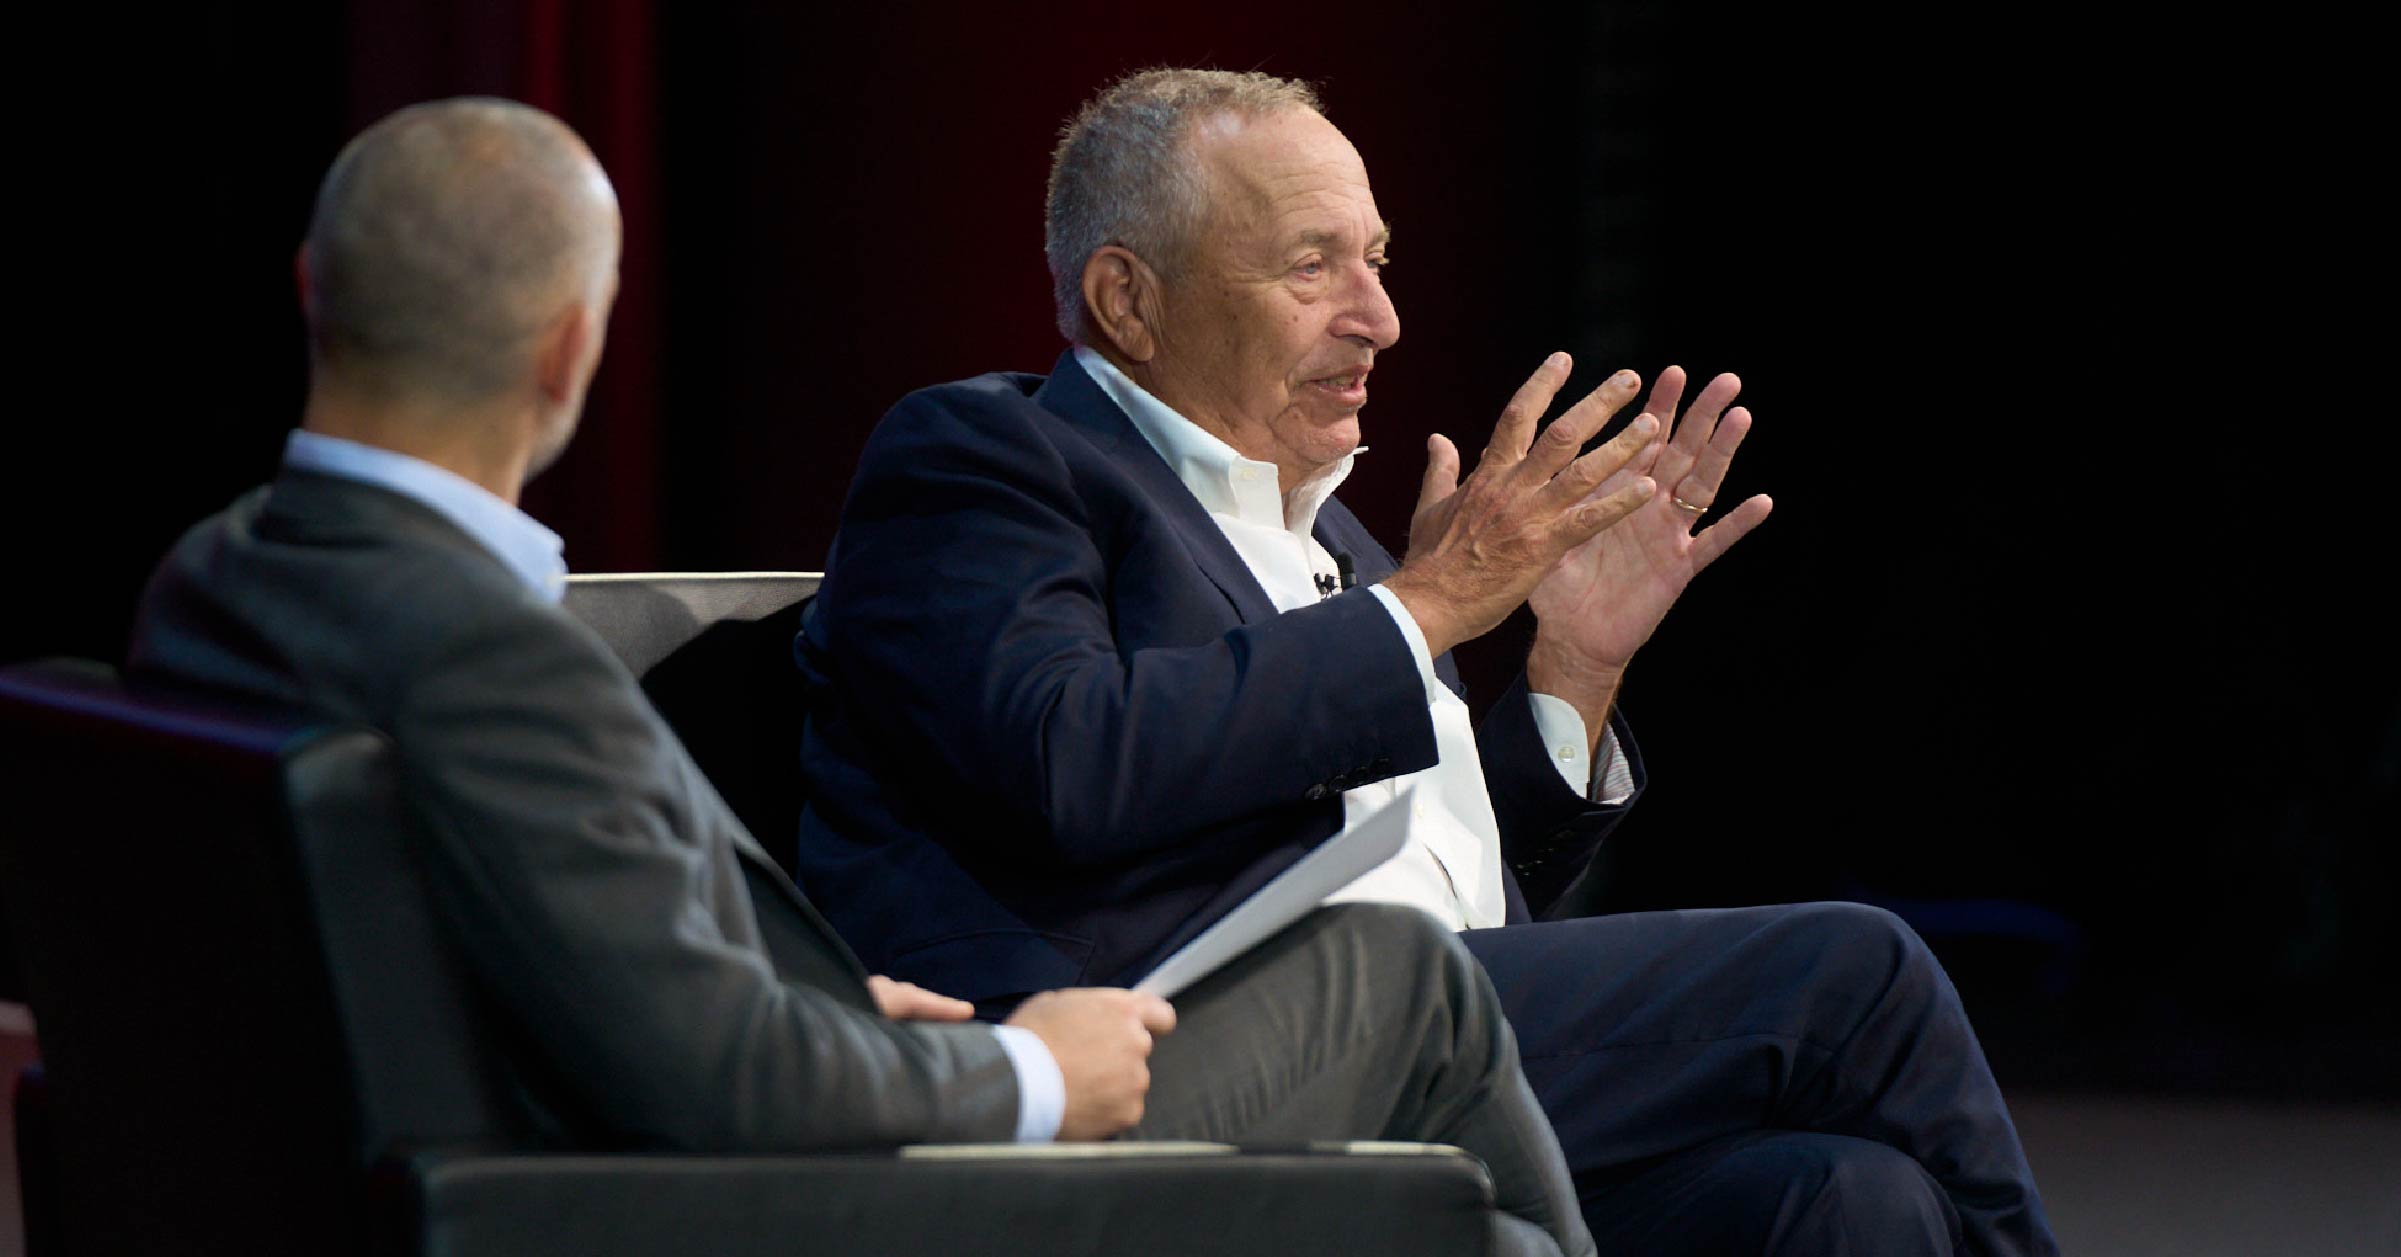 A photo of Lawrence Summers, former US Treasury secretary, and Daniel Needham, the president of  Morningstar Investment Management, on stage at the 2023 Morningstar Investment Conference.